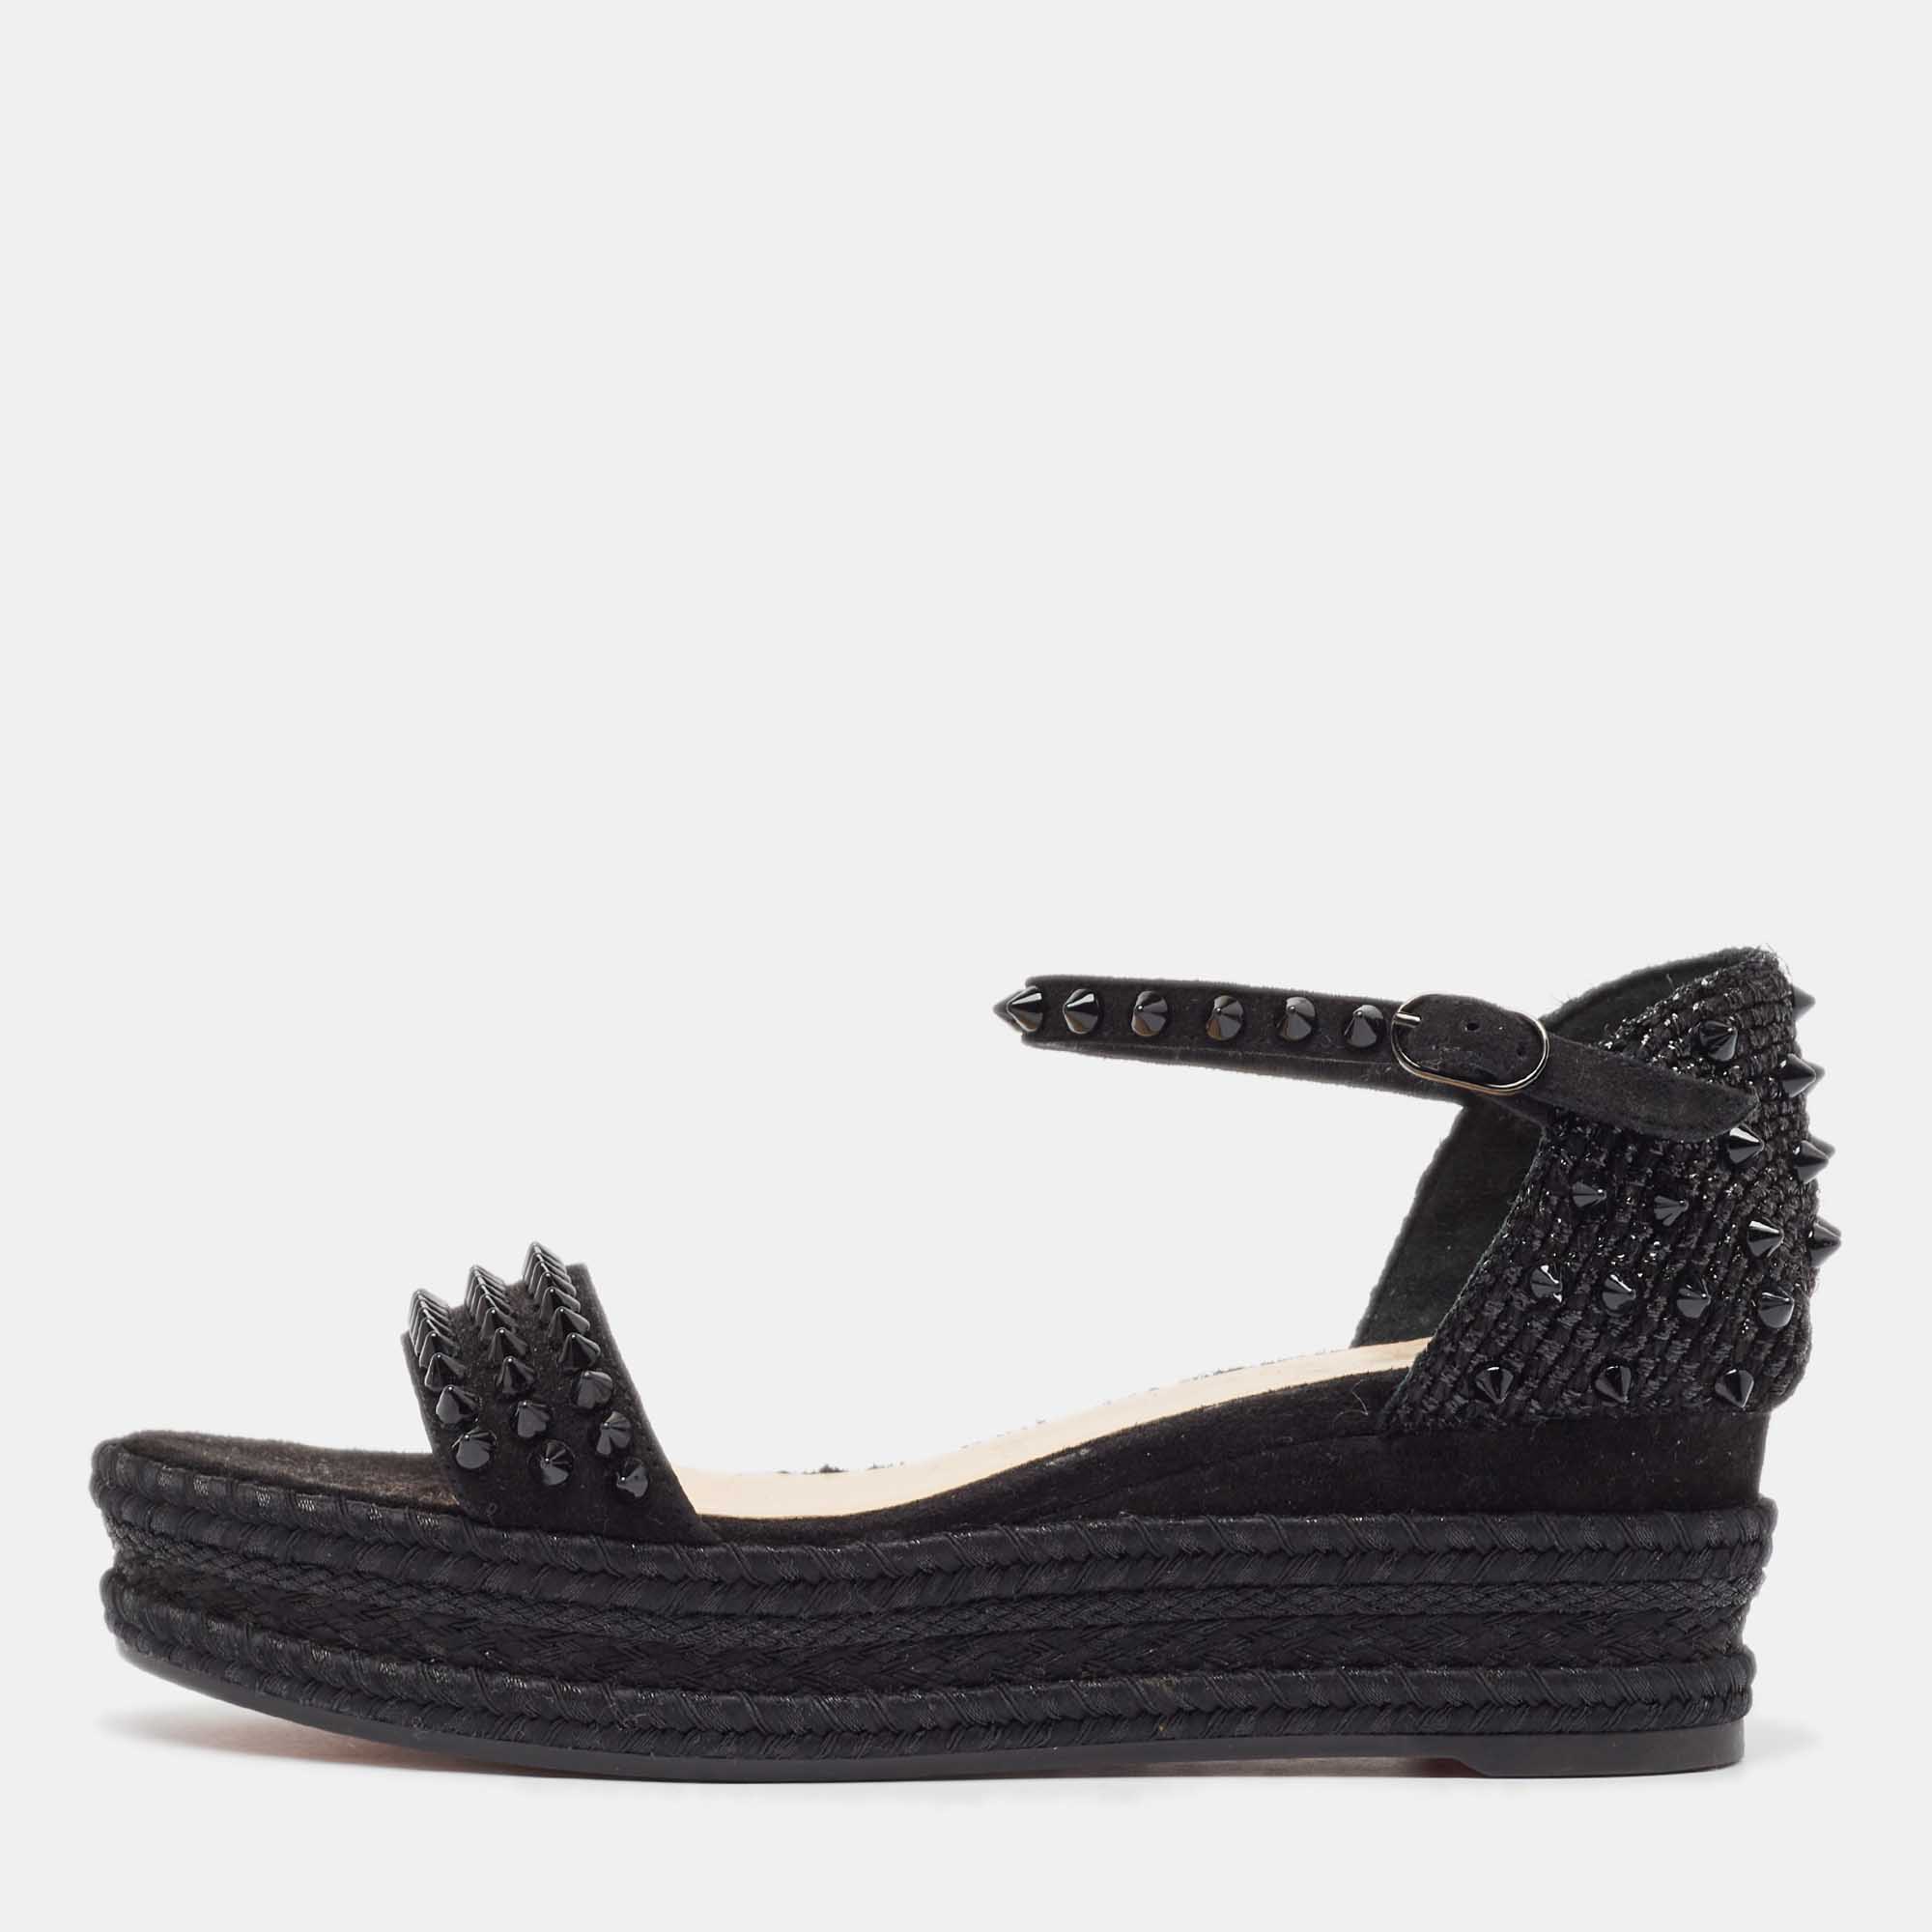 Christian louboutin black suede and raffia madmonica sandals size 37